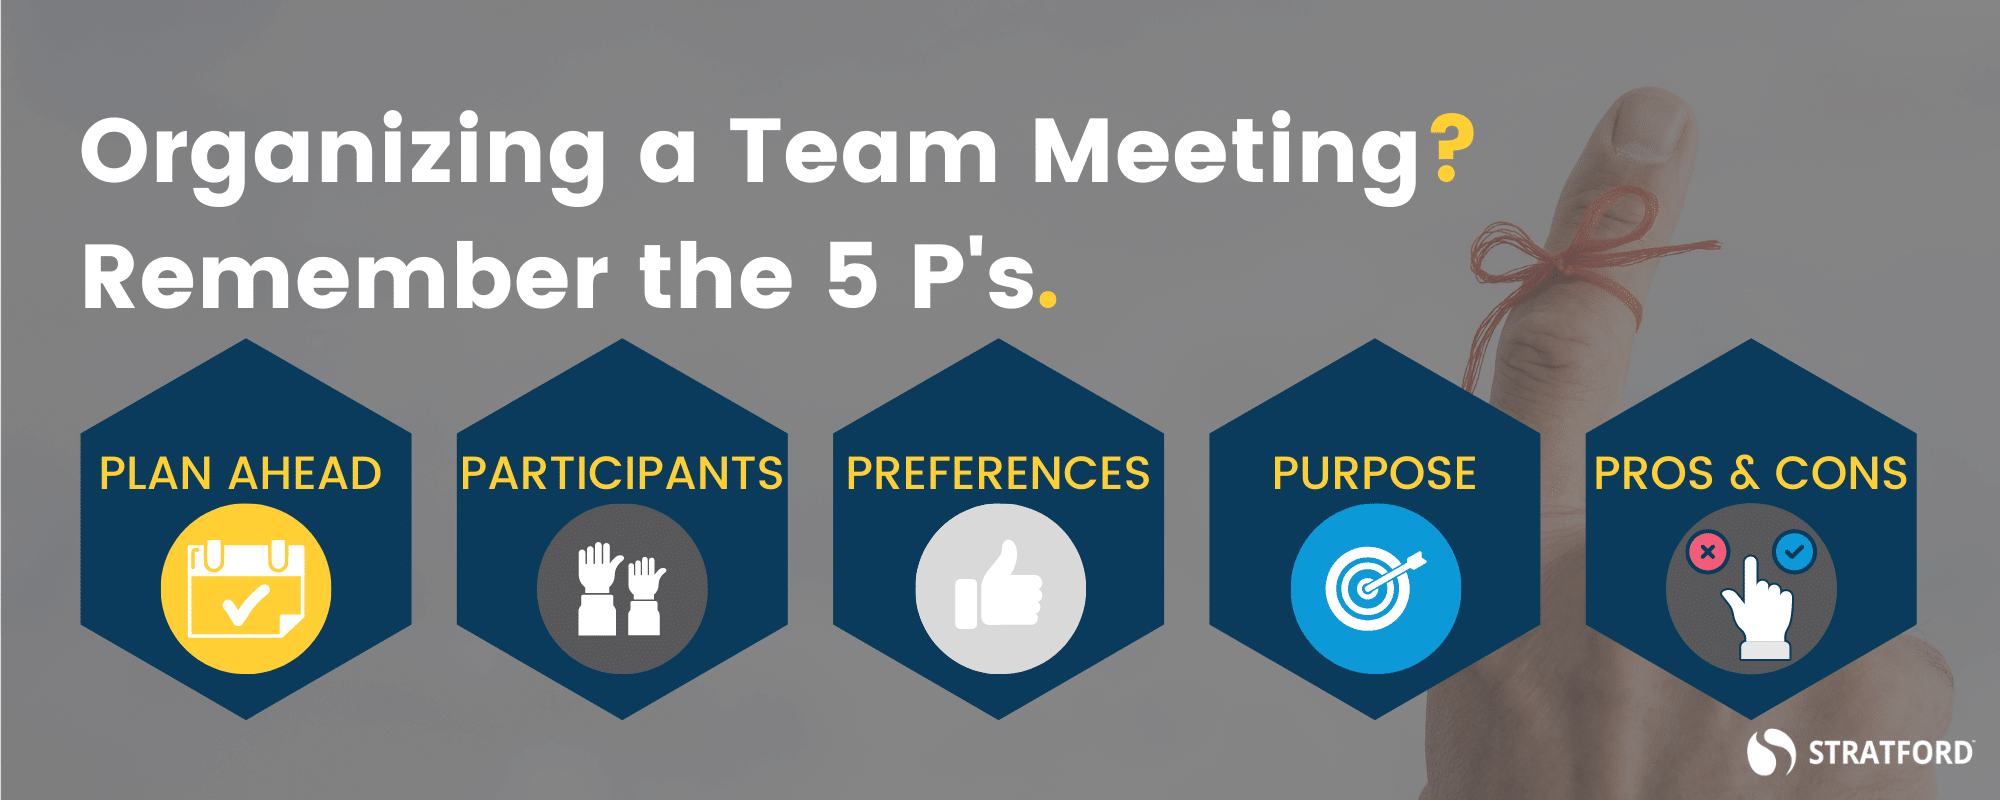 Text: Organizing a Team Meeting? Remember the 5 P's -with each of the P's represented in a hexagon. 1. Plan ahead with calendar 2. Participants with 2 hands raised 3. Preferences with thumbs up 4. Purpose with arrow in bullseye 5. Pros and Cons with finger hovering over x and a checkmark